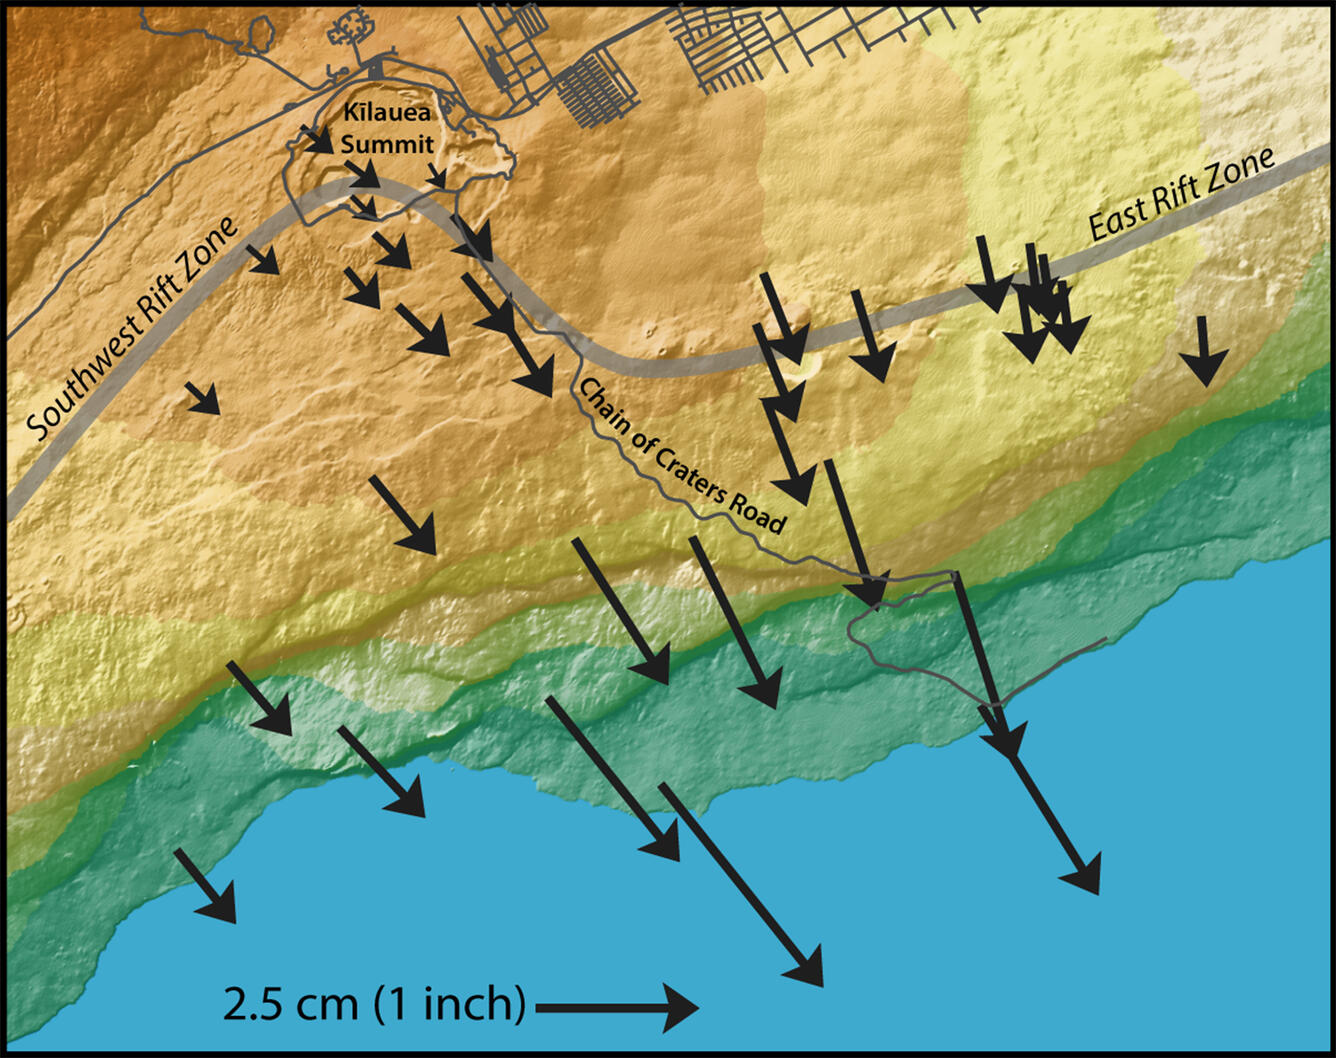 direction of motion measured by GPS stations